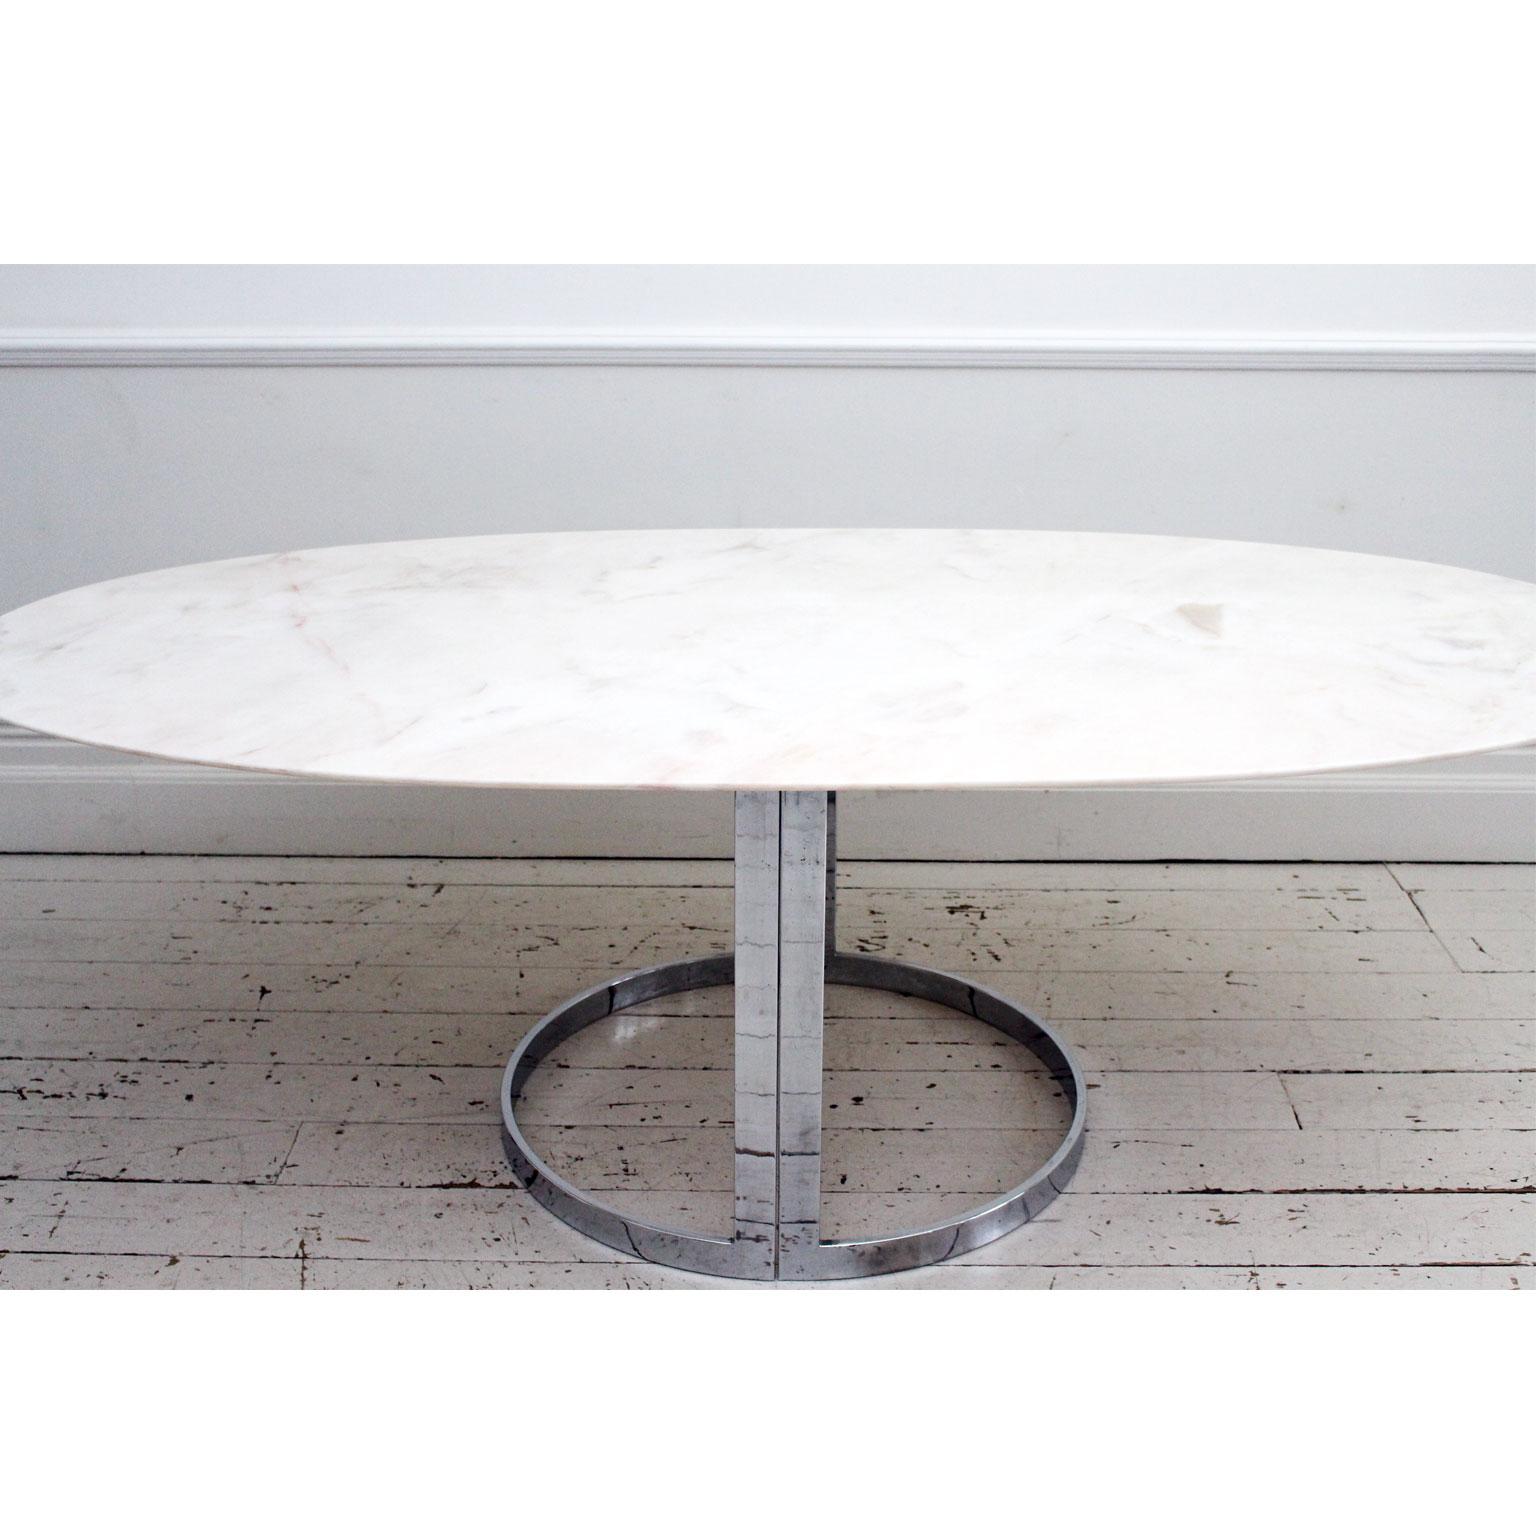 This 1970s Italian table is everything a dining table should be. Sleek, chic and beautiful. The oval Portuguese Rosa marble top is exquisitely Fine - it has lovely pinky tones running through the white background. The two part chrome base is